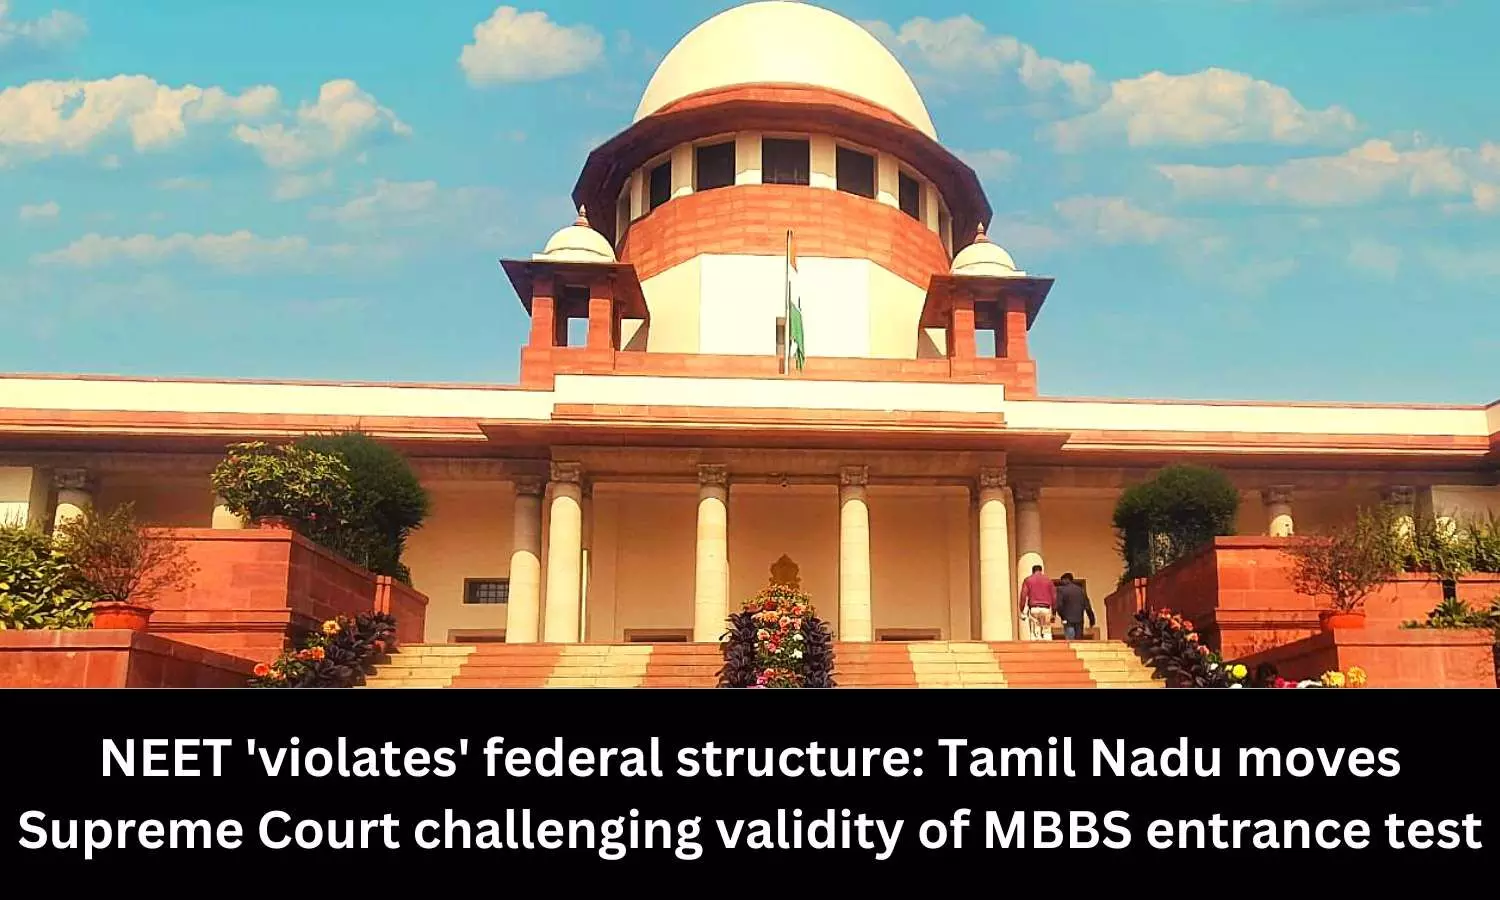 NEET violates federal structure: Tamil Nadu moves SC challenging validity of MBBS entrance test